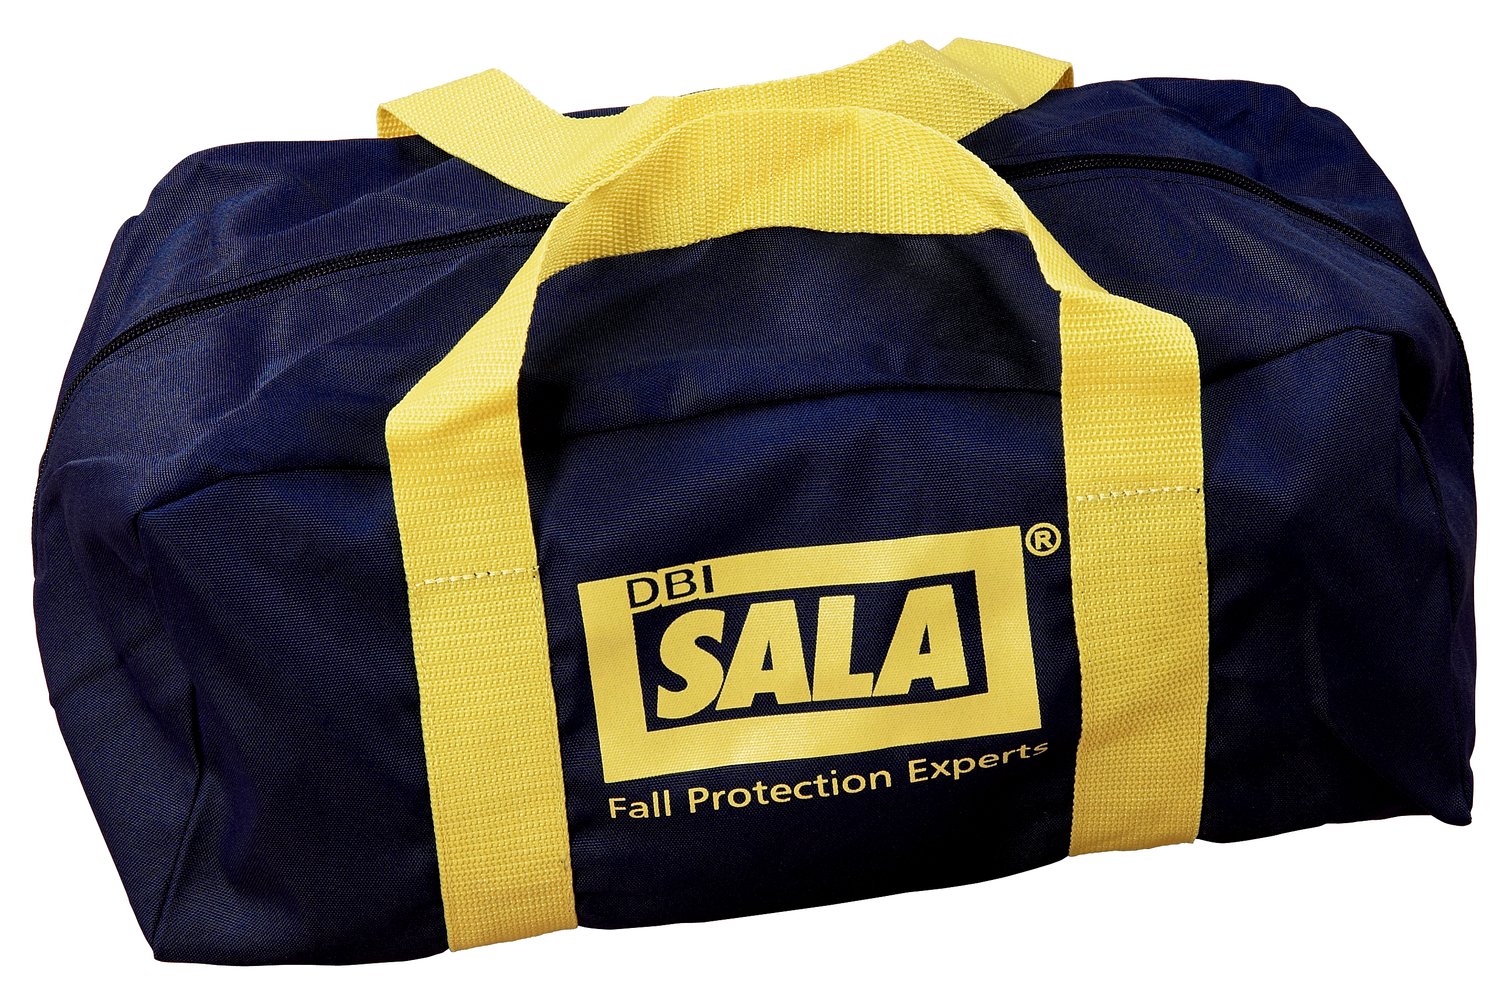 7100311235 - 3M DBI-SALA Equipment Carrying and Storage Bag 9511597, 7.5 in x 6.5
in x 15.5 in